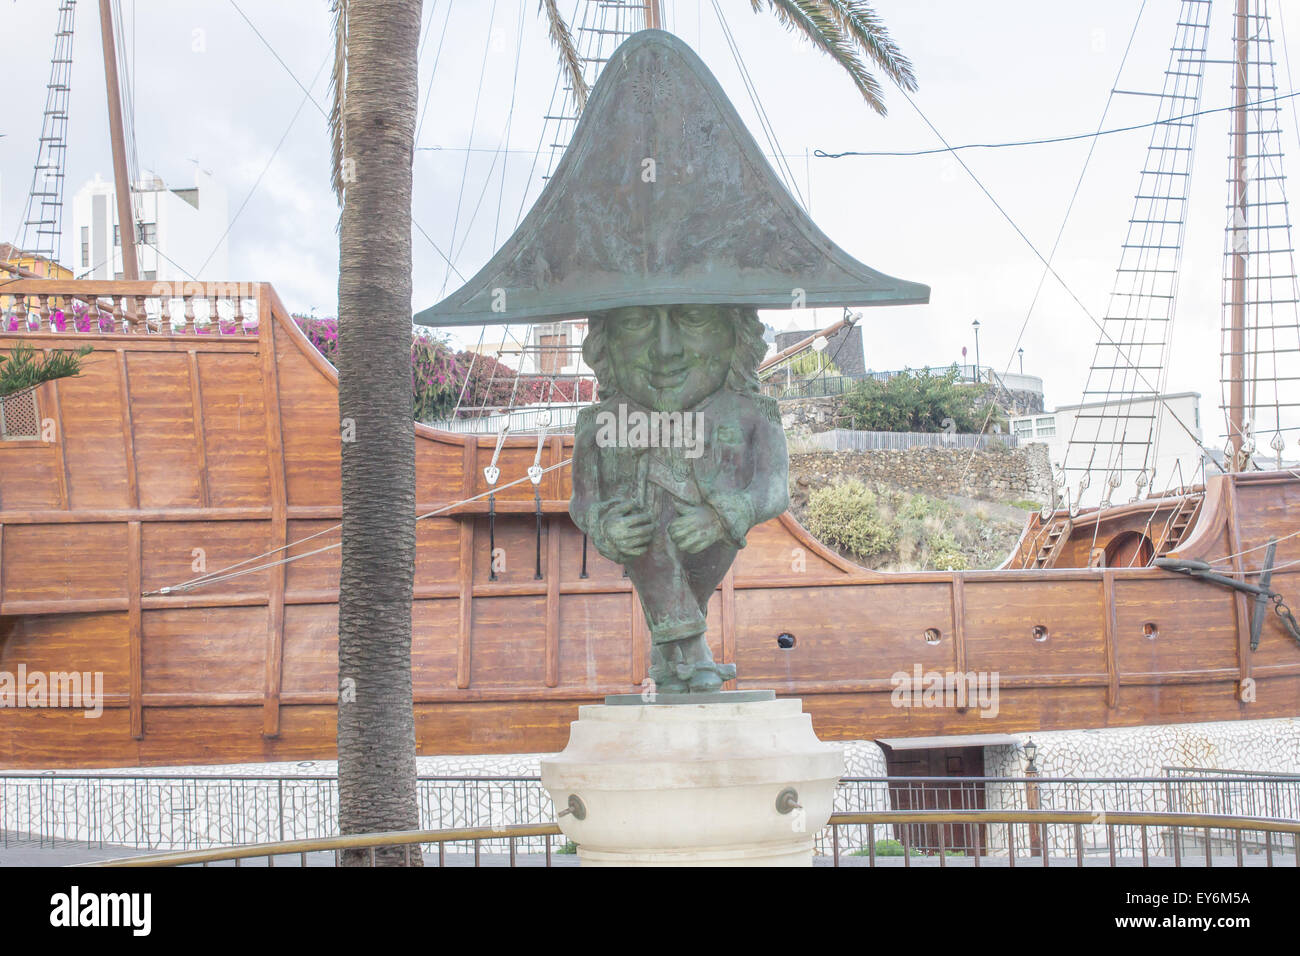 A dwarf statue designed by a local artist Luis Morera is on display outside the La Palma Maritime Museum in Santa Cruz. Stock Photo